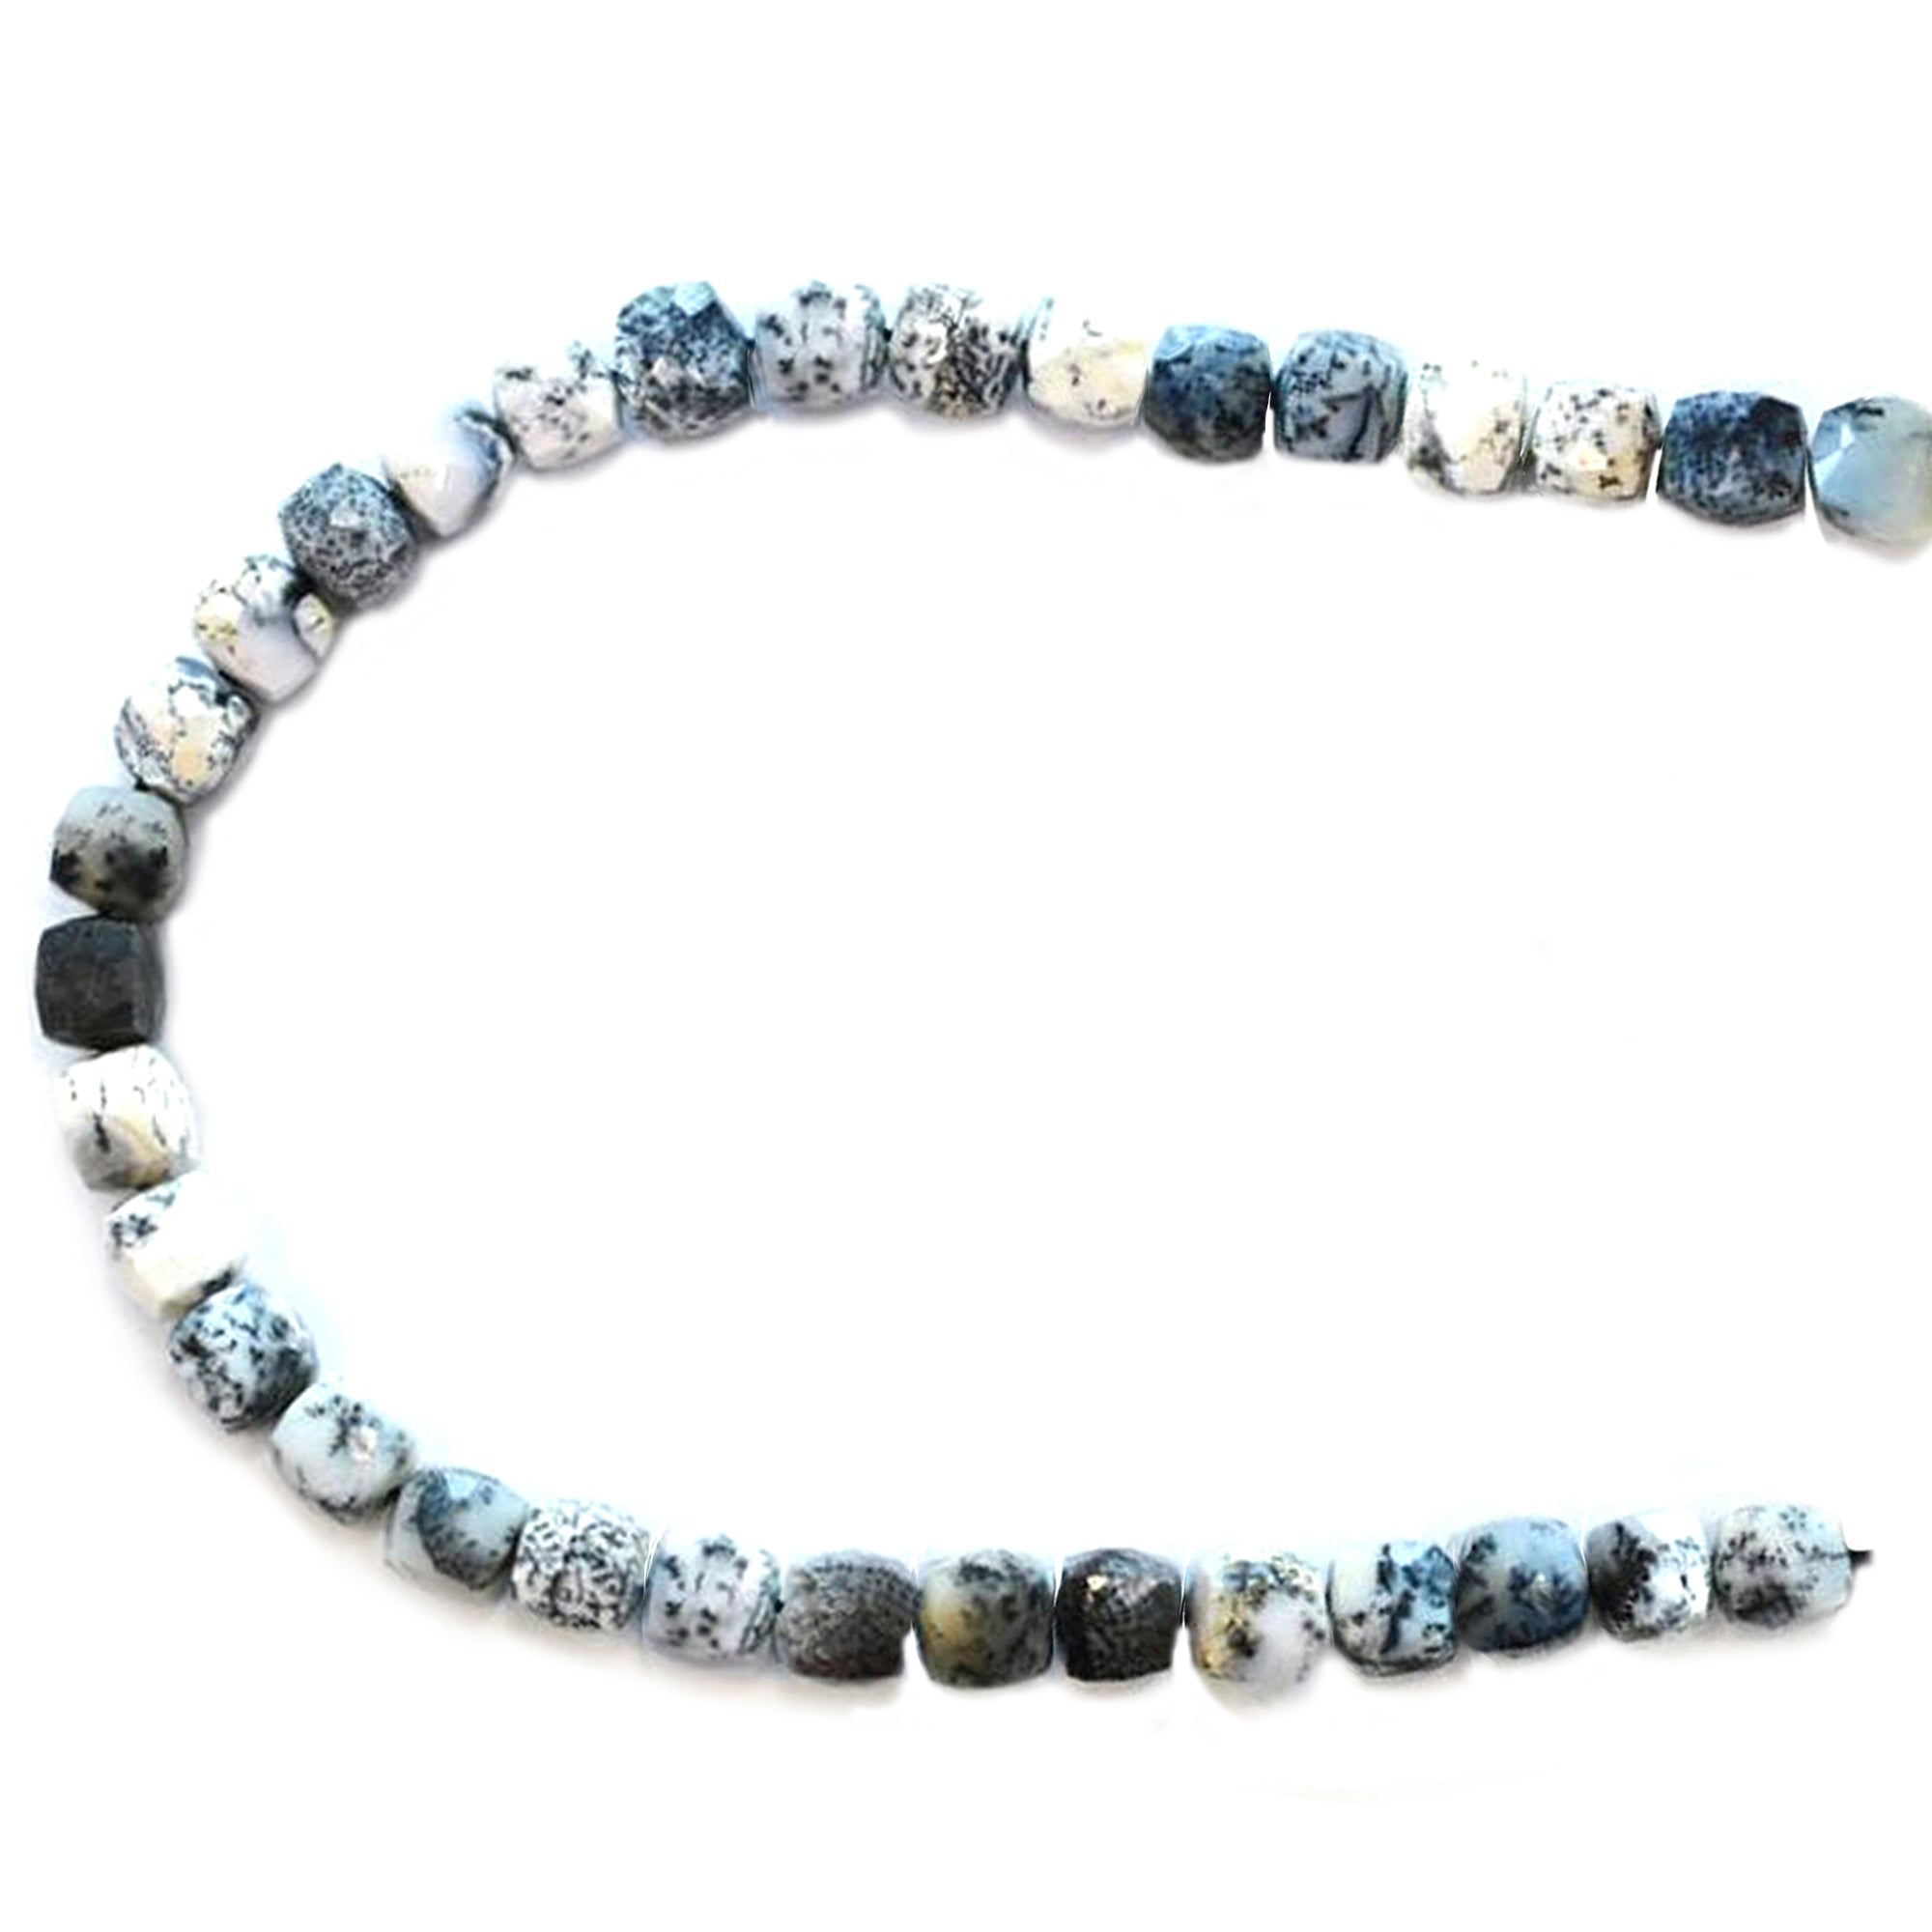 Dendritic Opal 6 To 7 MM Faceted Cube Shape Beads Strand